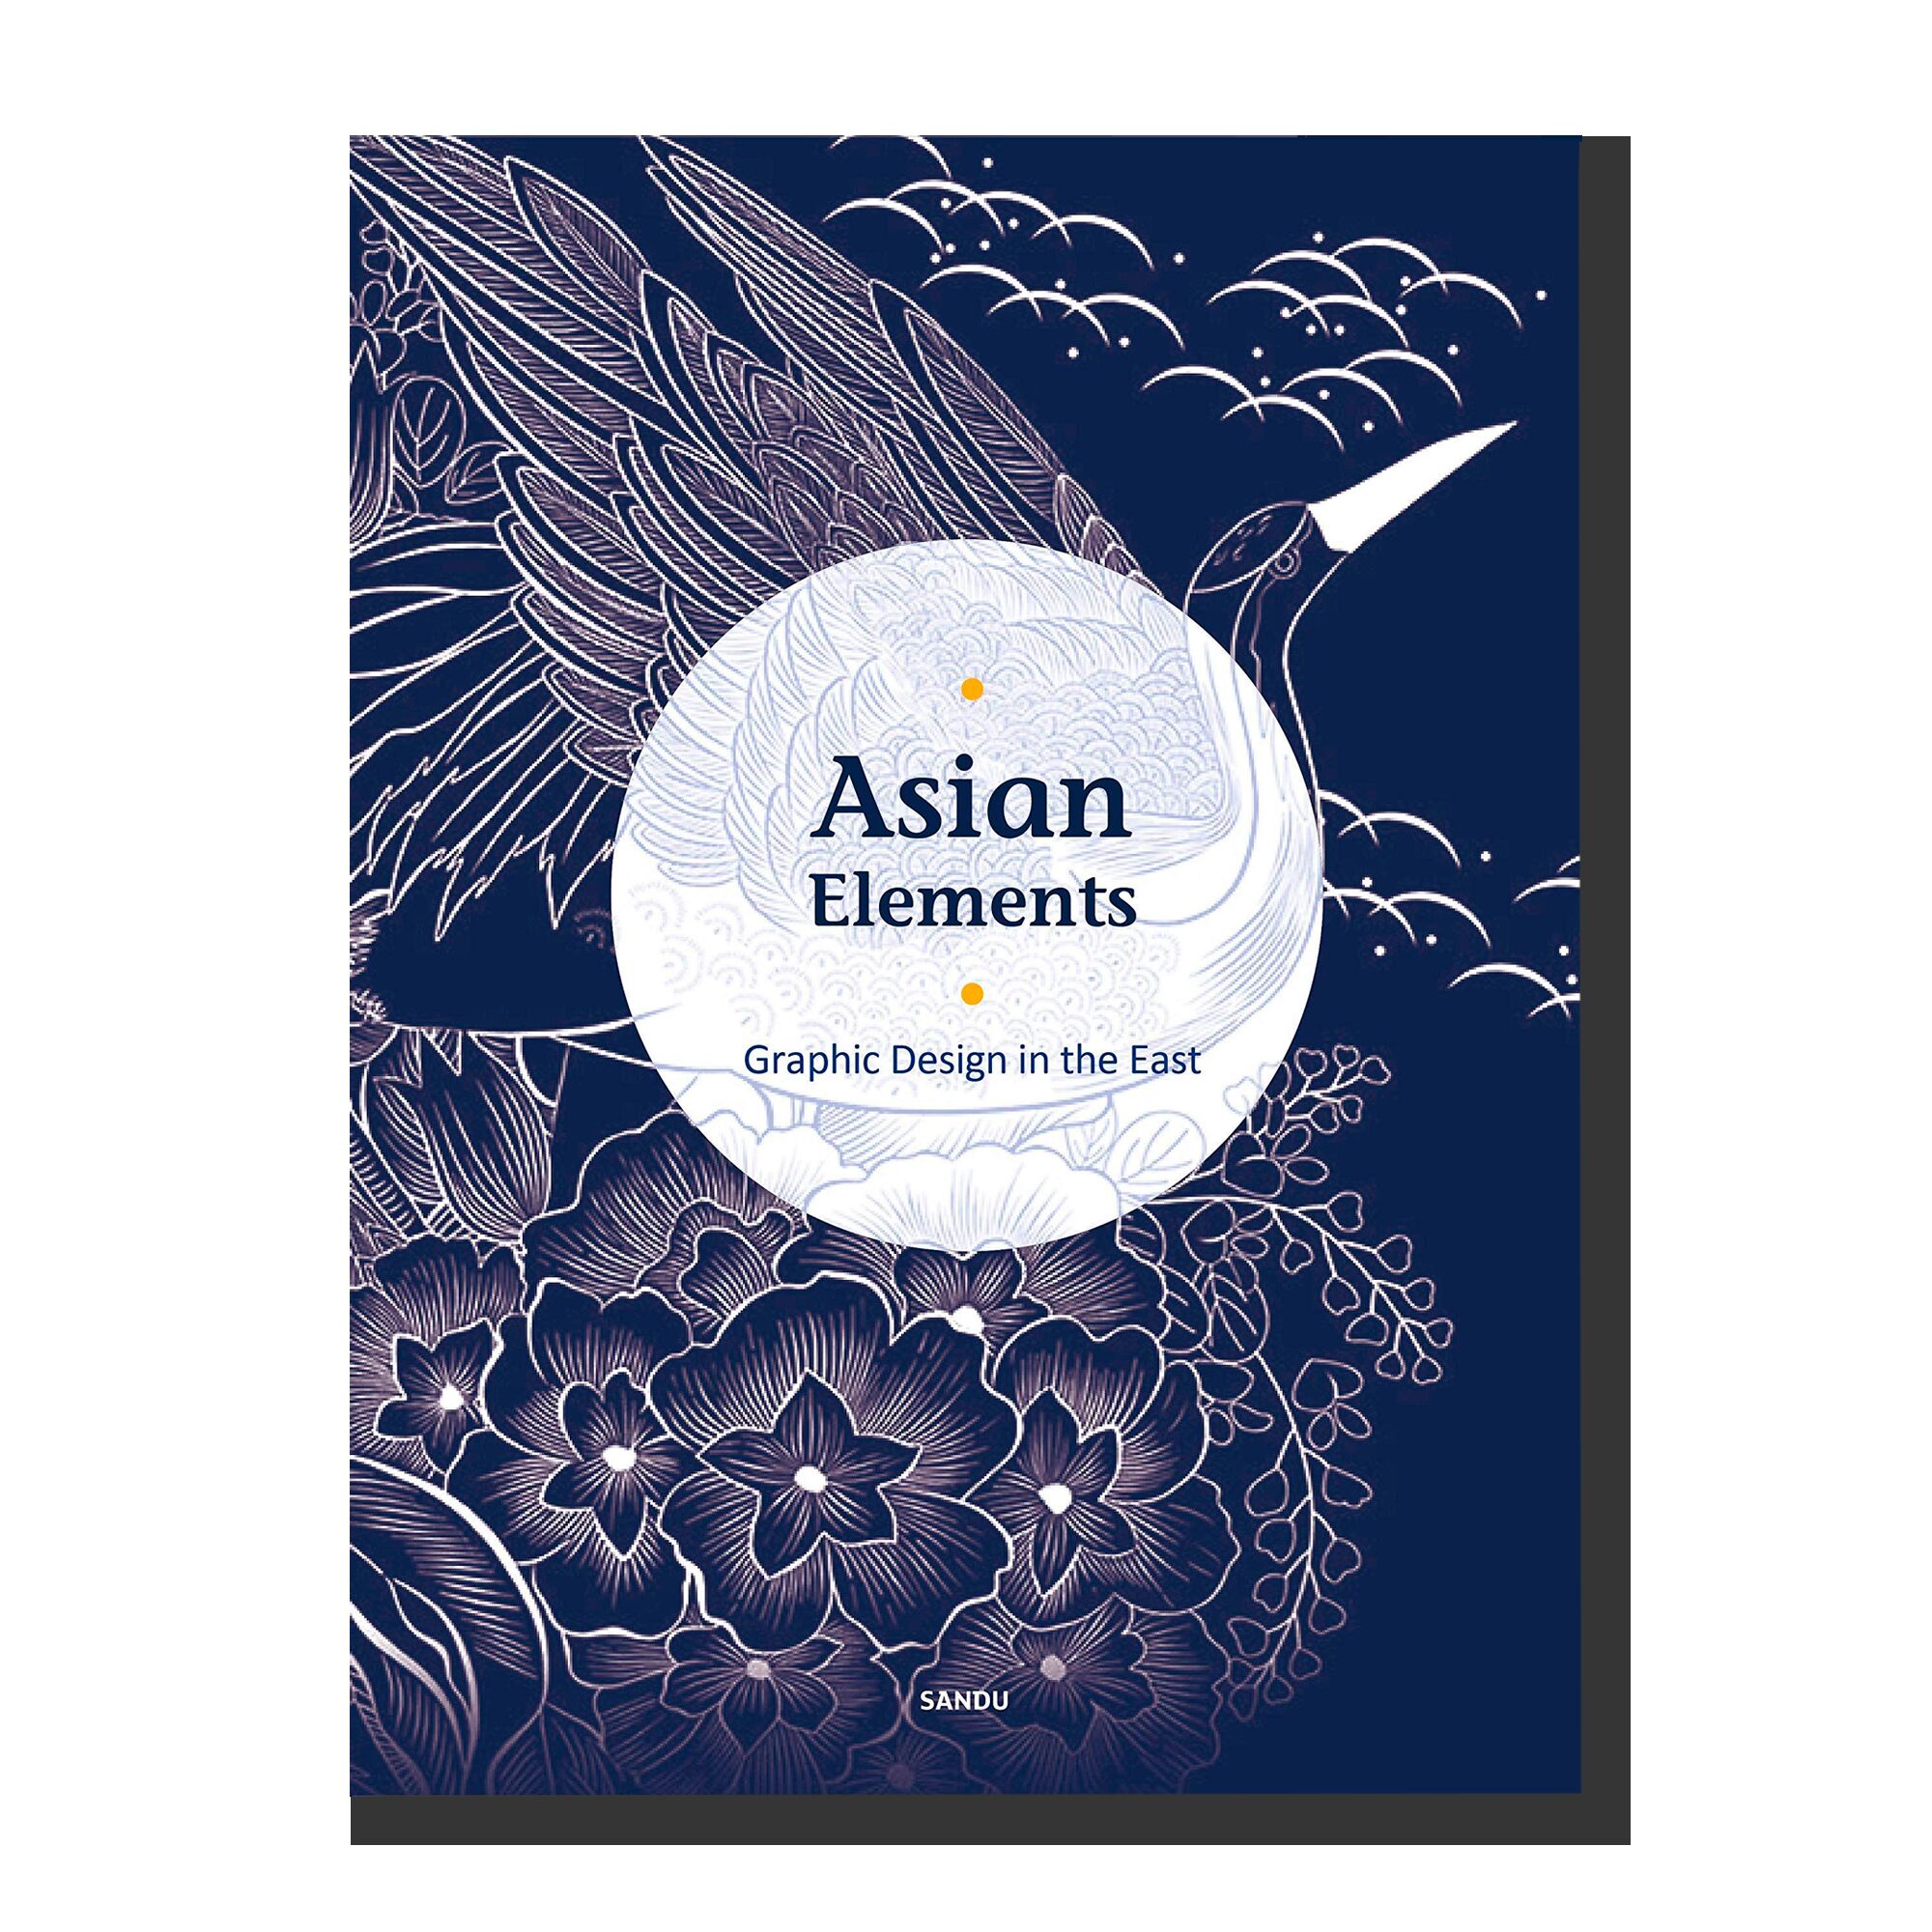 Asian Elements: Graphic Design in the East